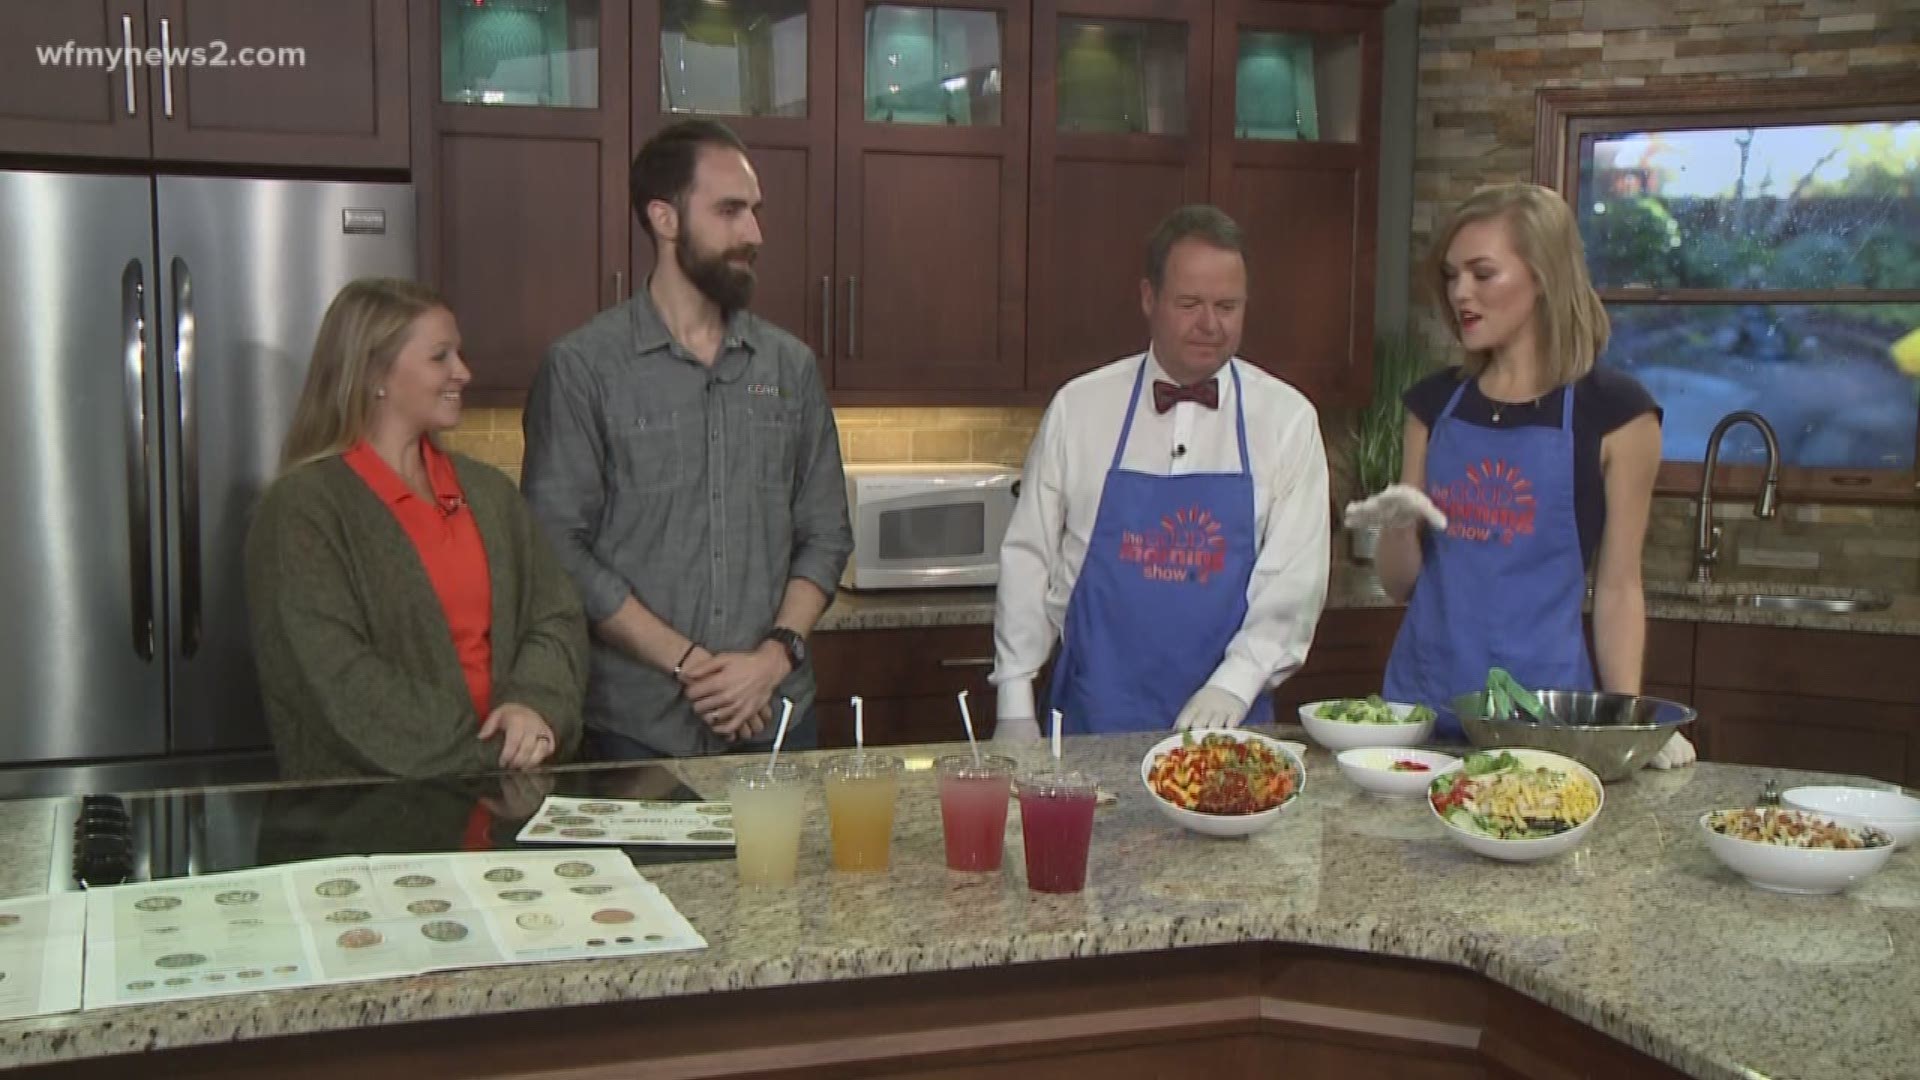 In The News 2 Kitchen With Corelife Eatery Part 2